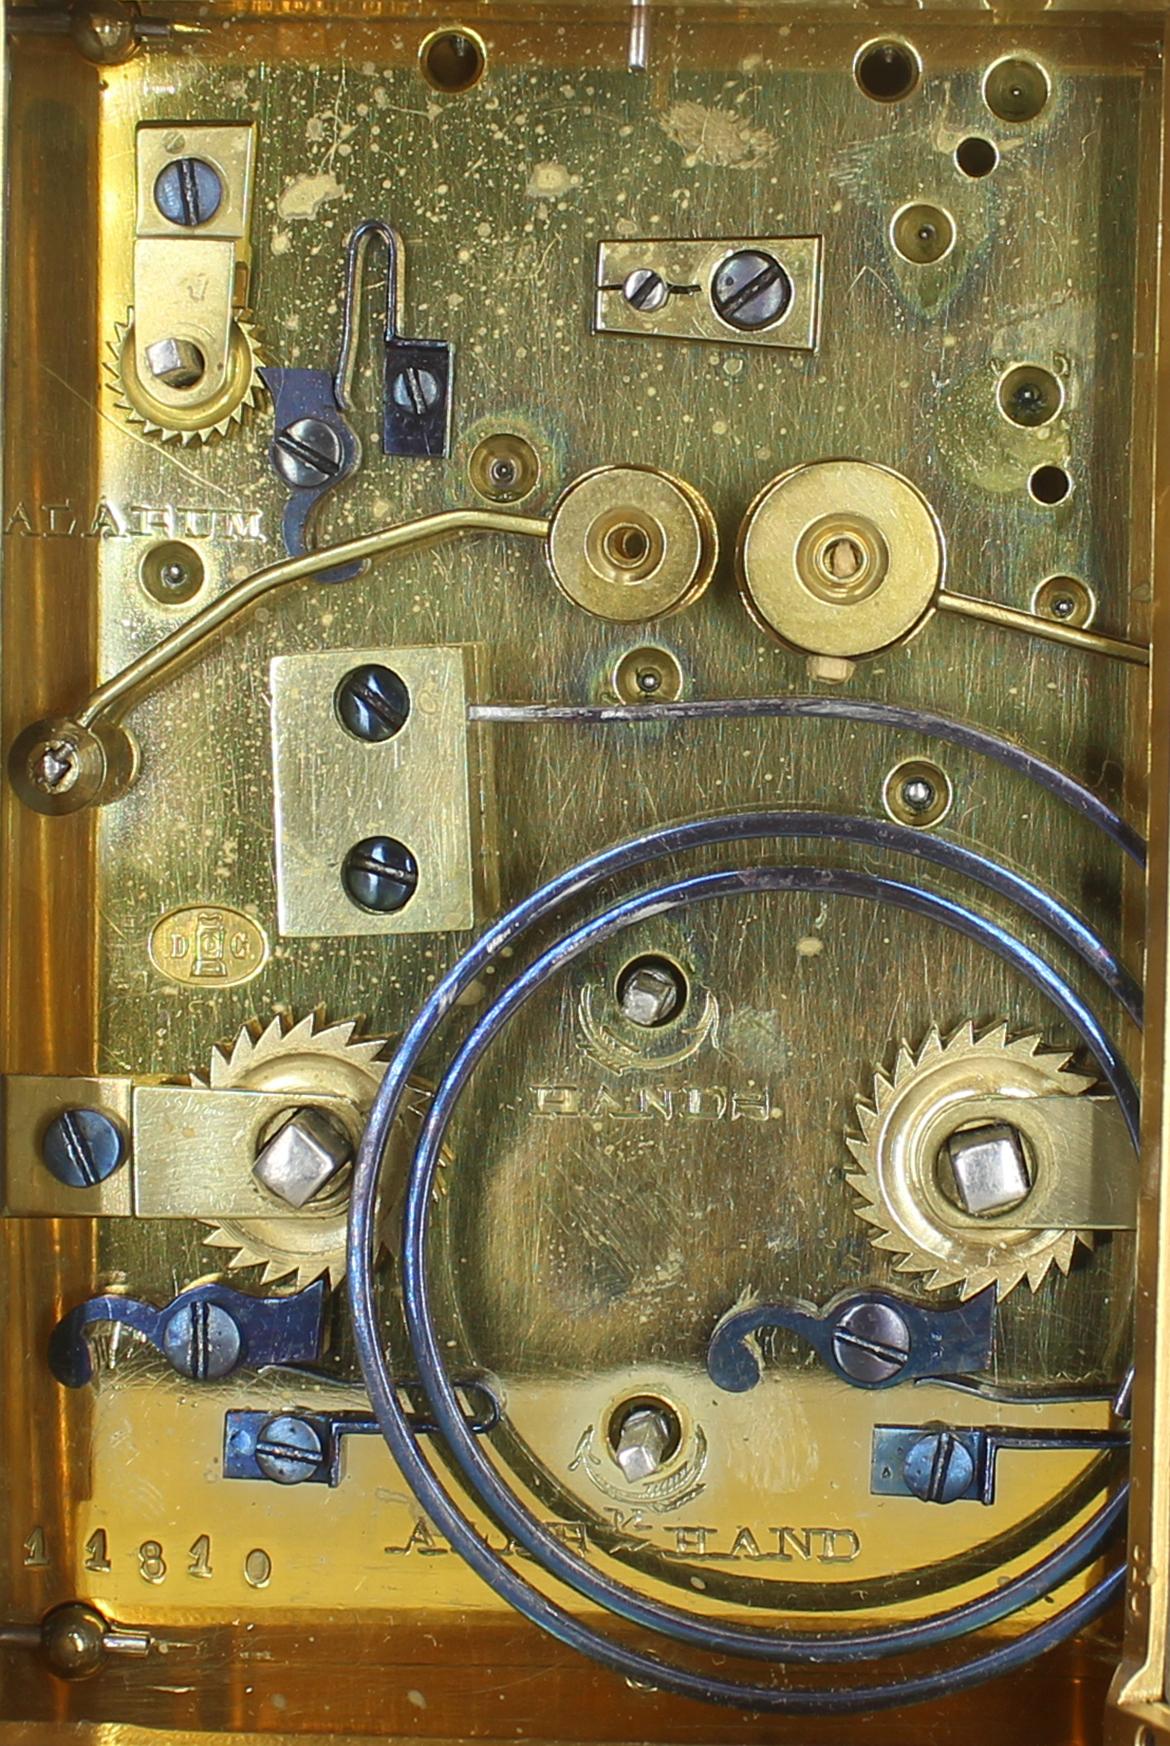 A strike repeat alarm carriage clock by Pierre Drocourt. Stamped and numbered with the Drocourt mark on the back plate in a gilded 'Gorge' case. Drocourt was one of the great carriage clock makers of the 19th Century, and this clock is a fine early